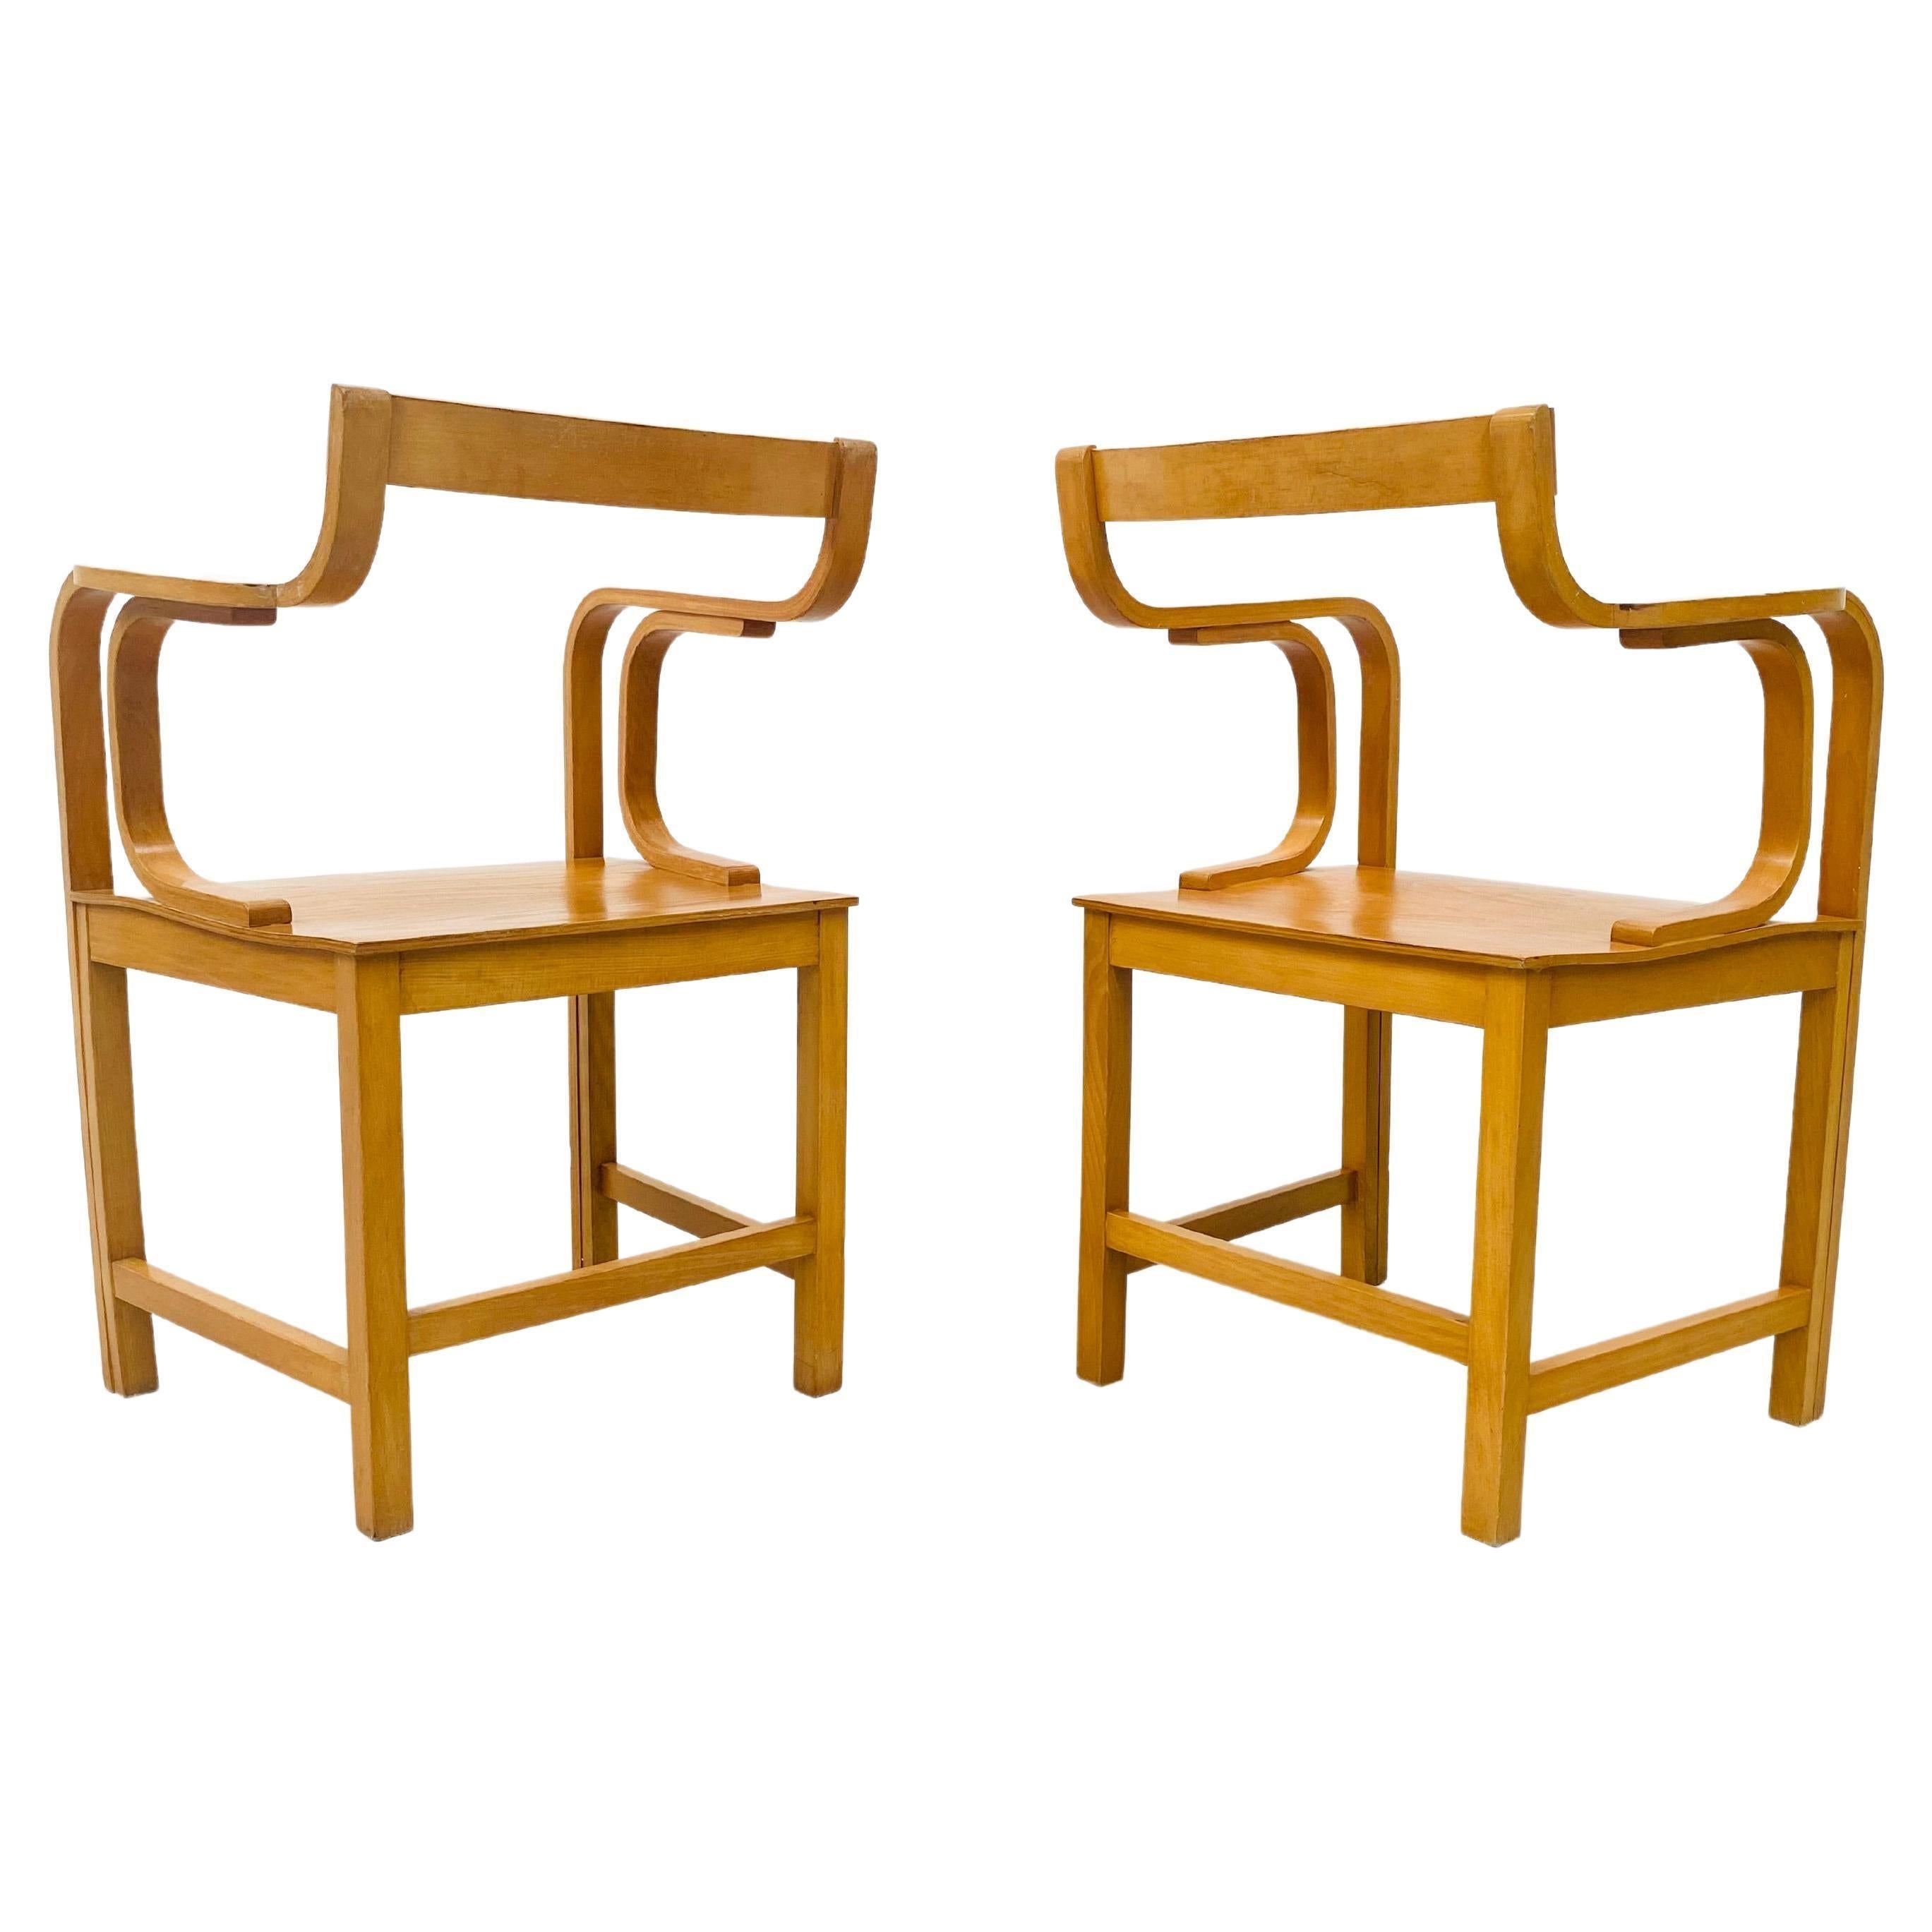 Vintage Dutch Plywood Beech Armchairs by Enraf Nonius Delft, 1970s In Good Condition For Sale In Eindhoven, Noord Brabant